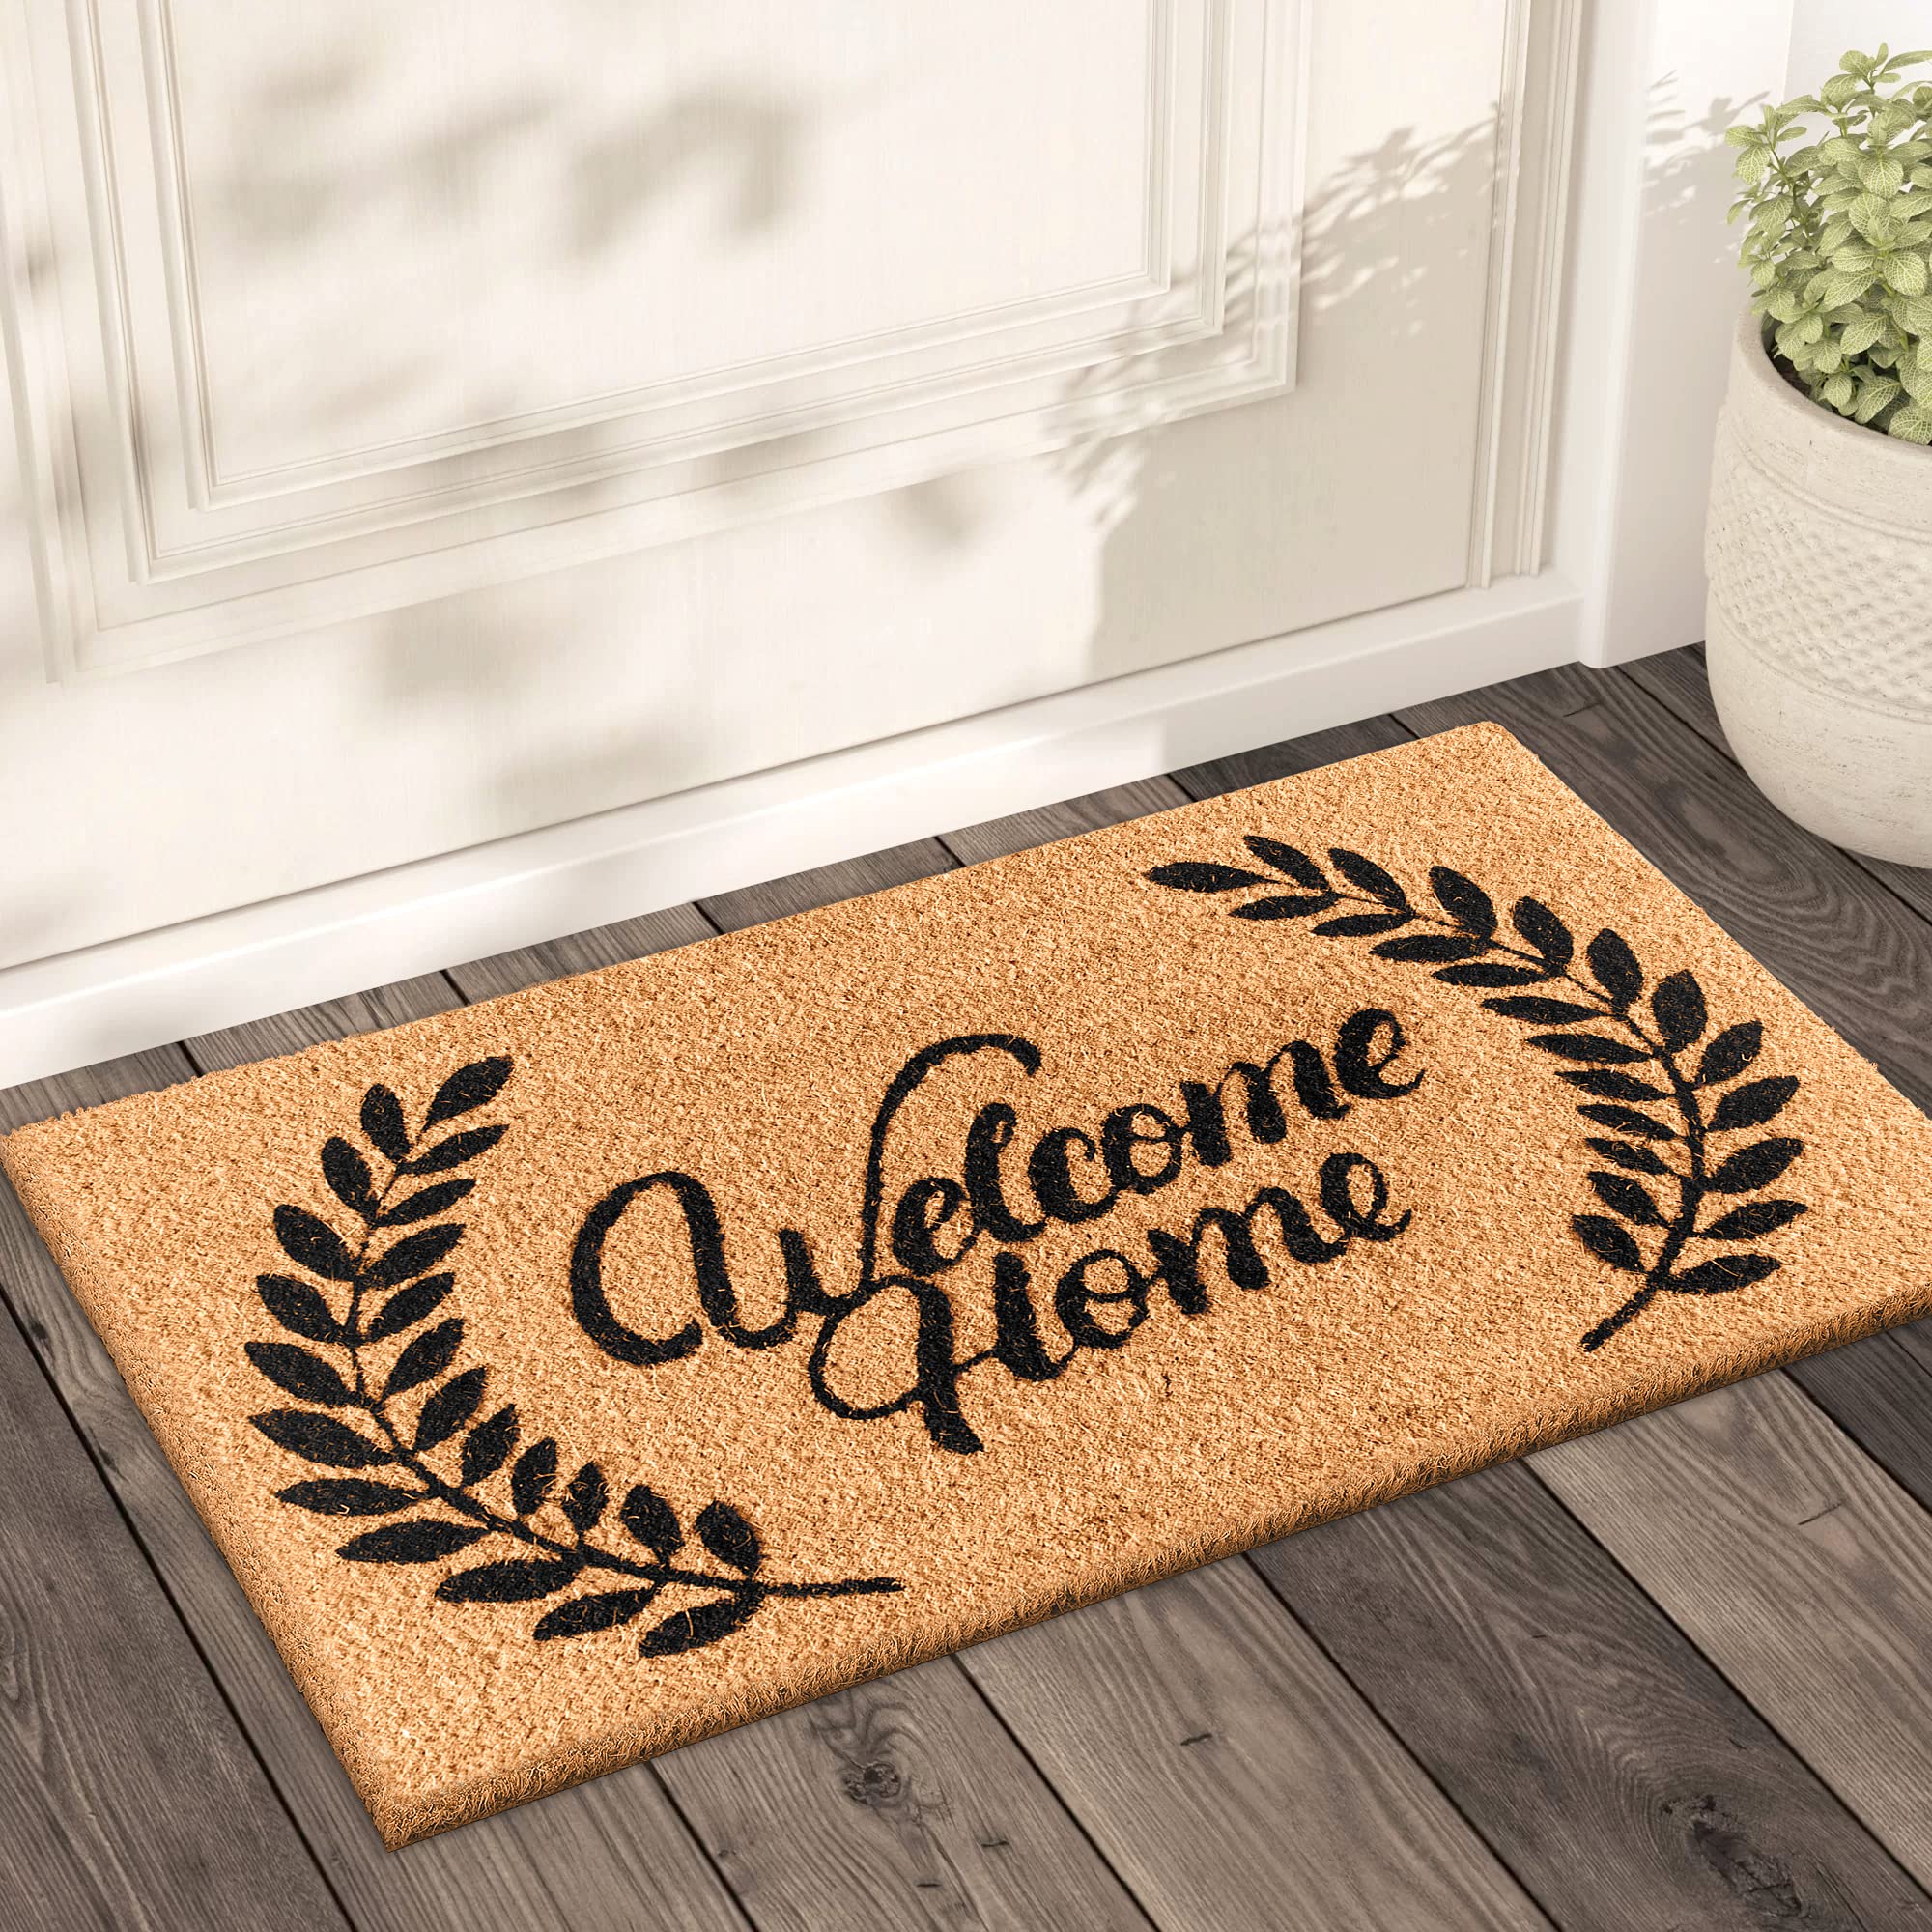 1 LuxUrux Welcome Mats Outdoor coco coir Doormat, with Heavy-Duty PVc  Backing - Natural - Perfect colorSizing for OutdoorI